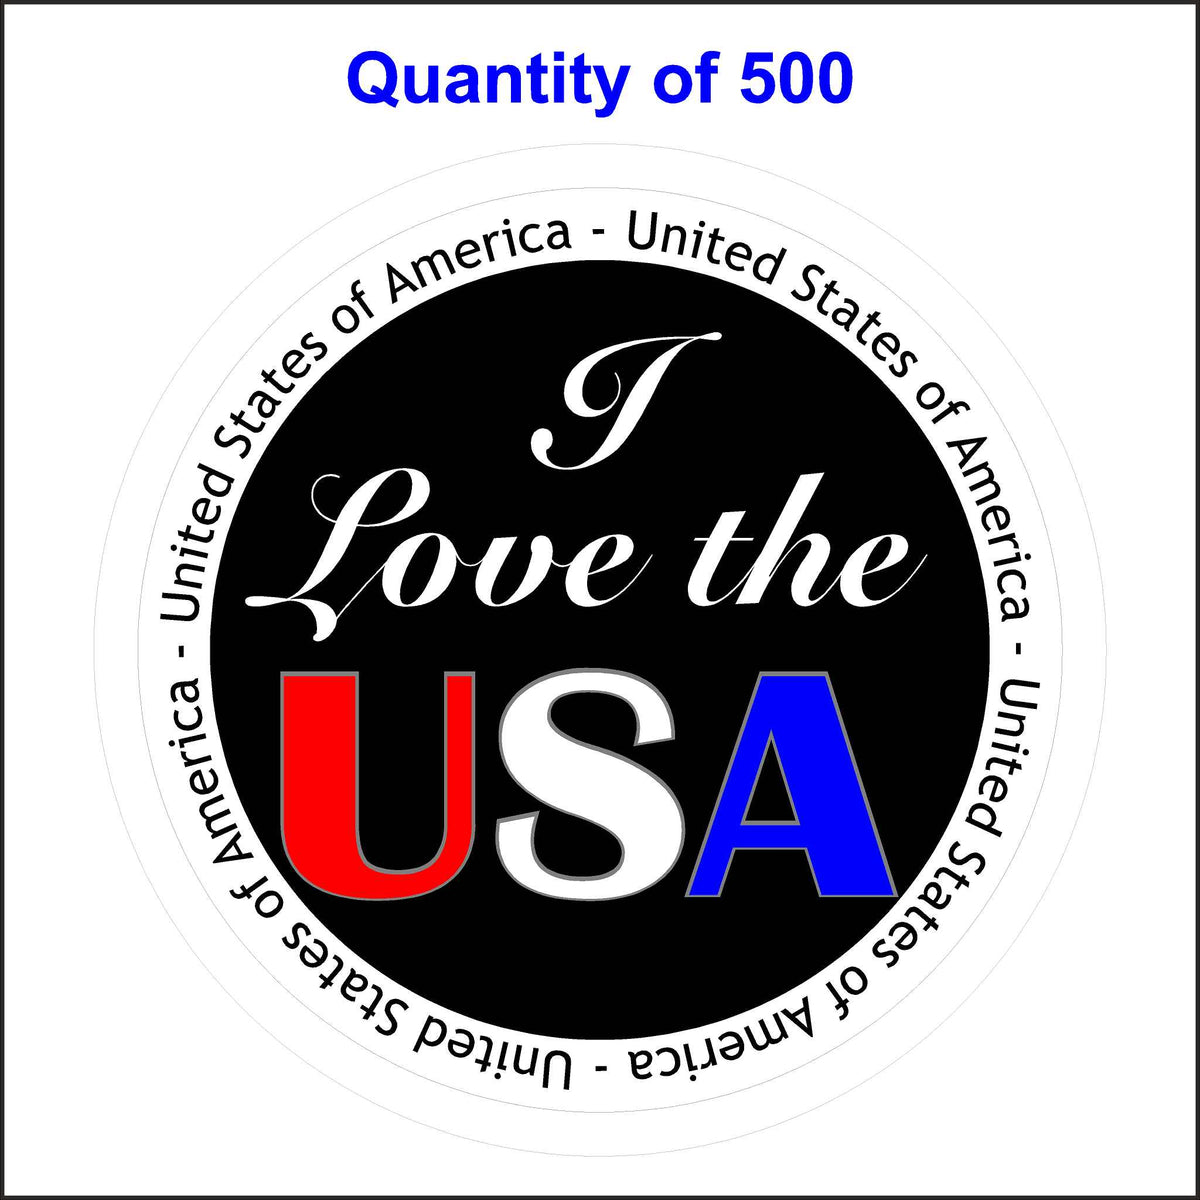 I Love the USA United States of America Sticker. Red, White and Blue Letters on a Black Background. 500 Quantity.